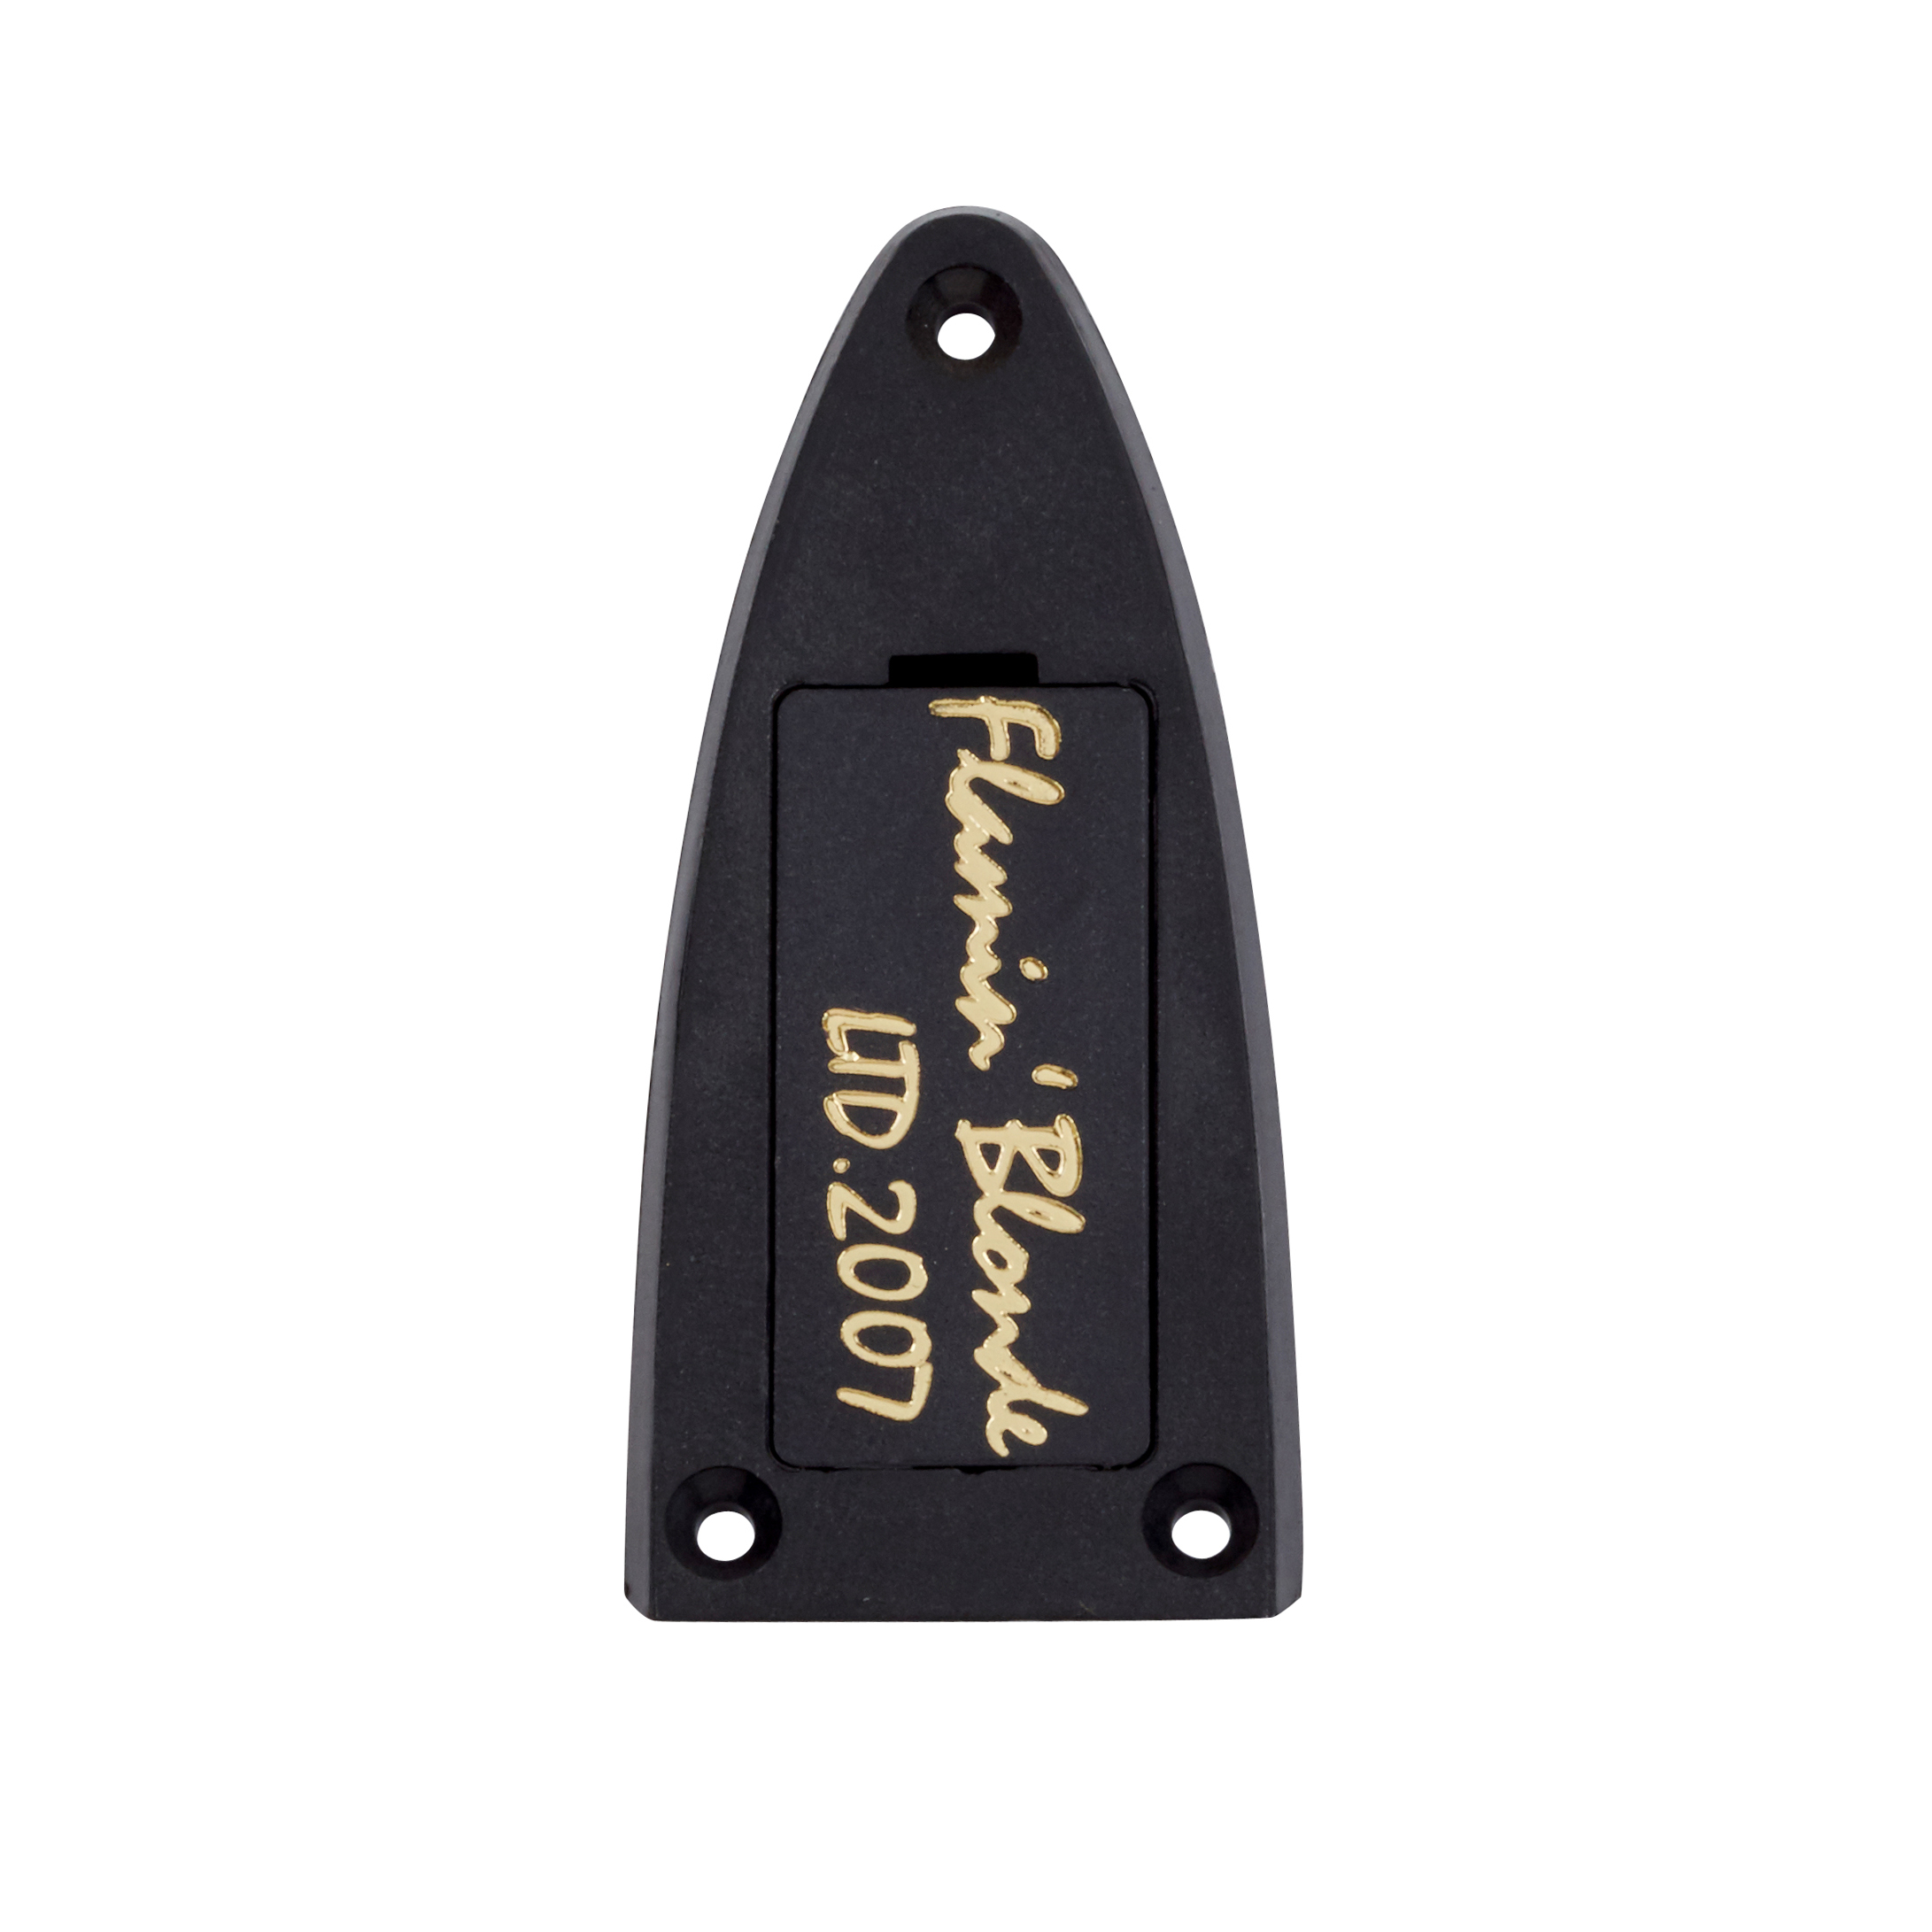 Warwick Parts - Easy-Access Truss Rod Cover for Warwick Flamin' Blonde LTD. 2007, Lefthand